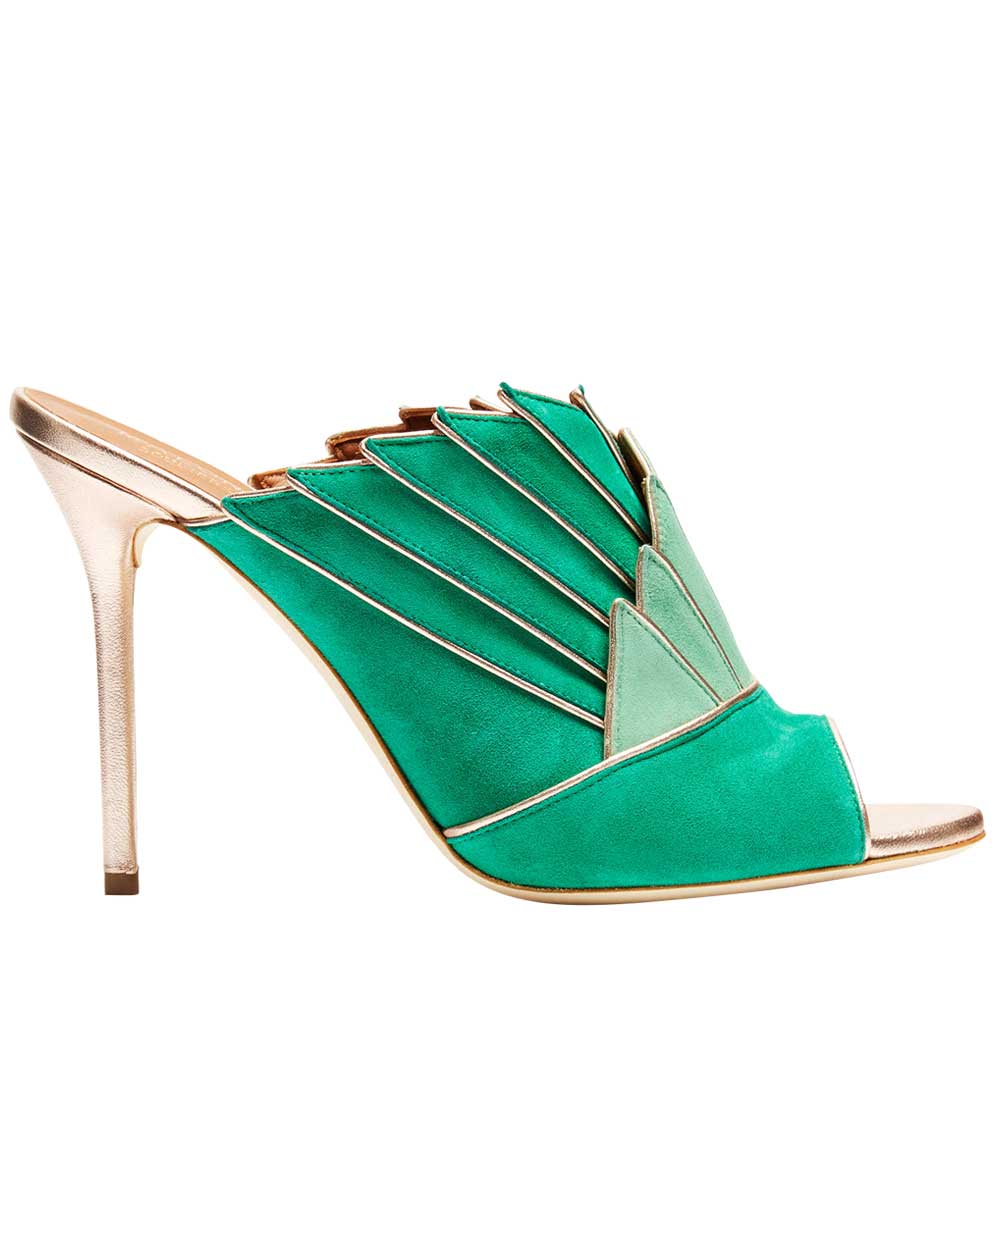 Malone Souliers heels, $830, from Matches Fashion